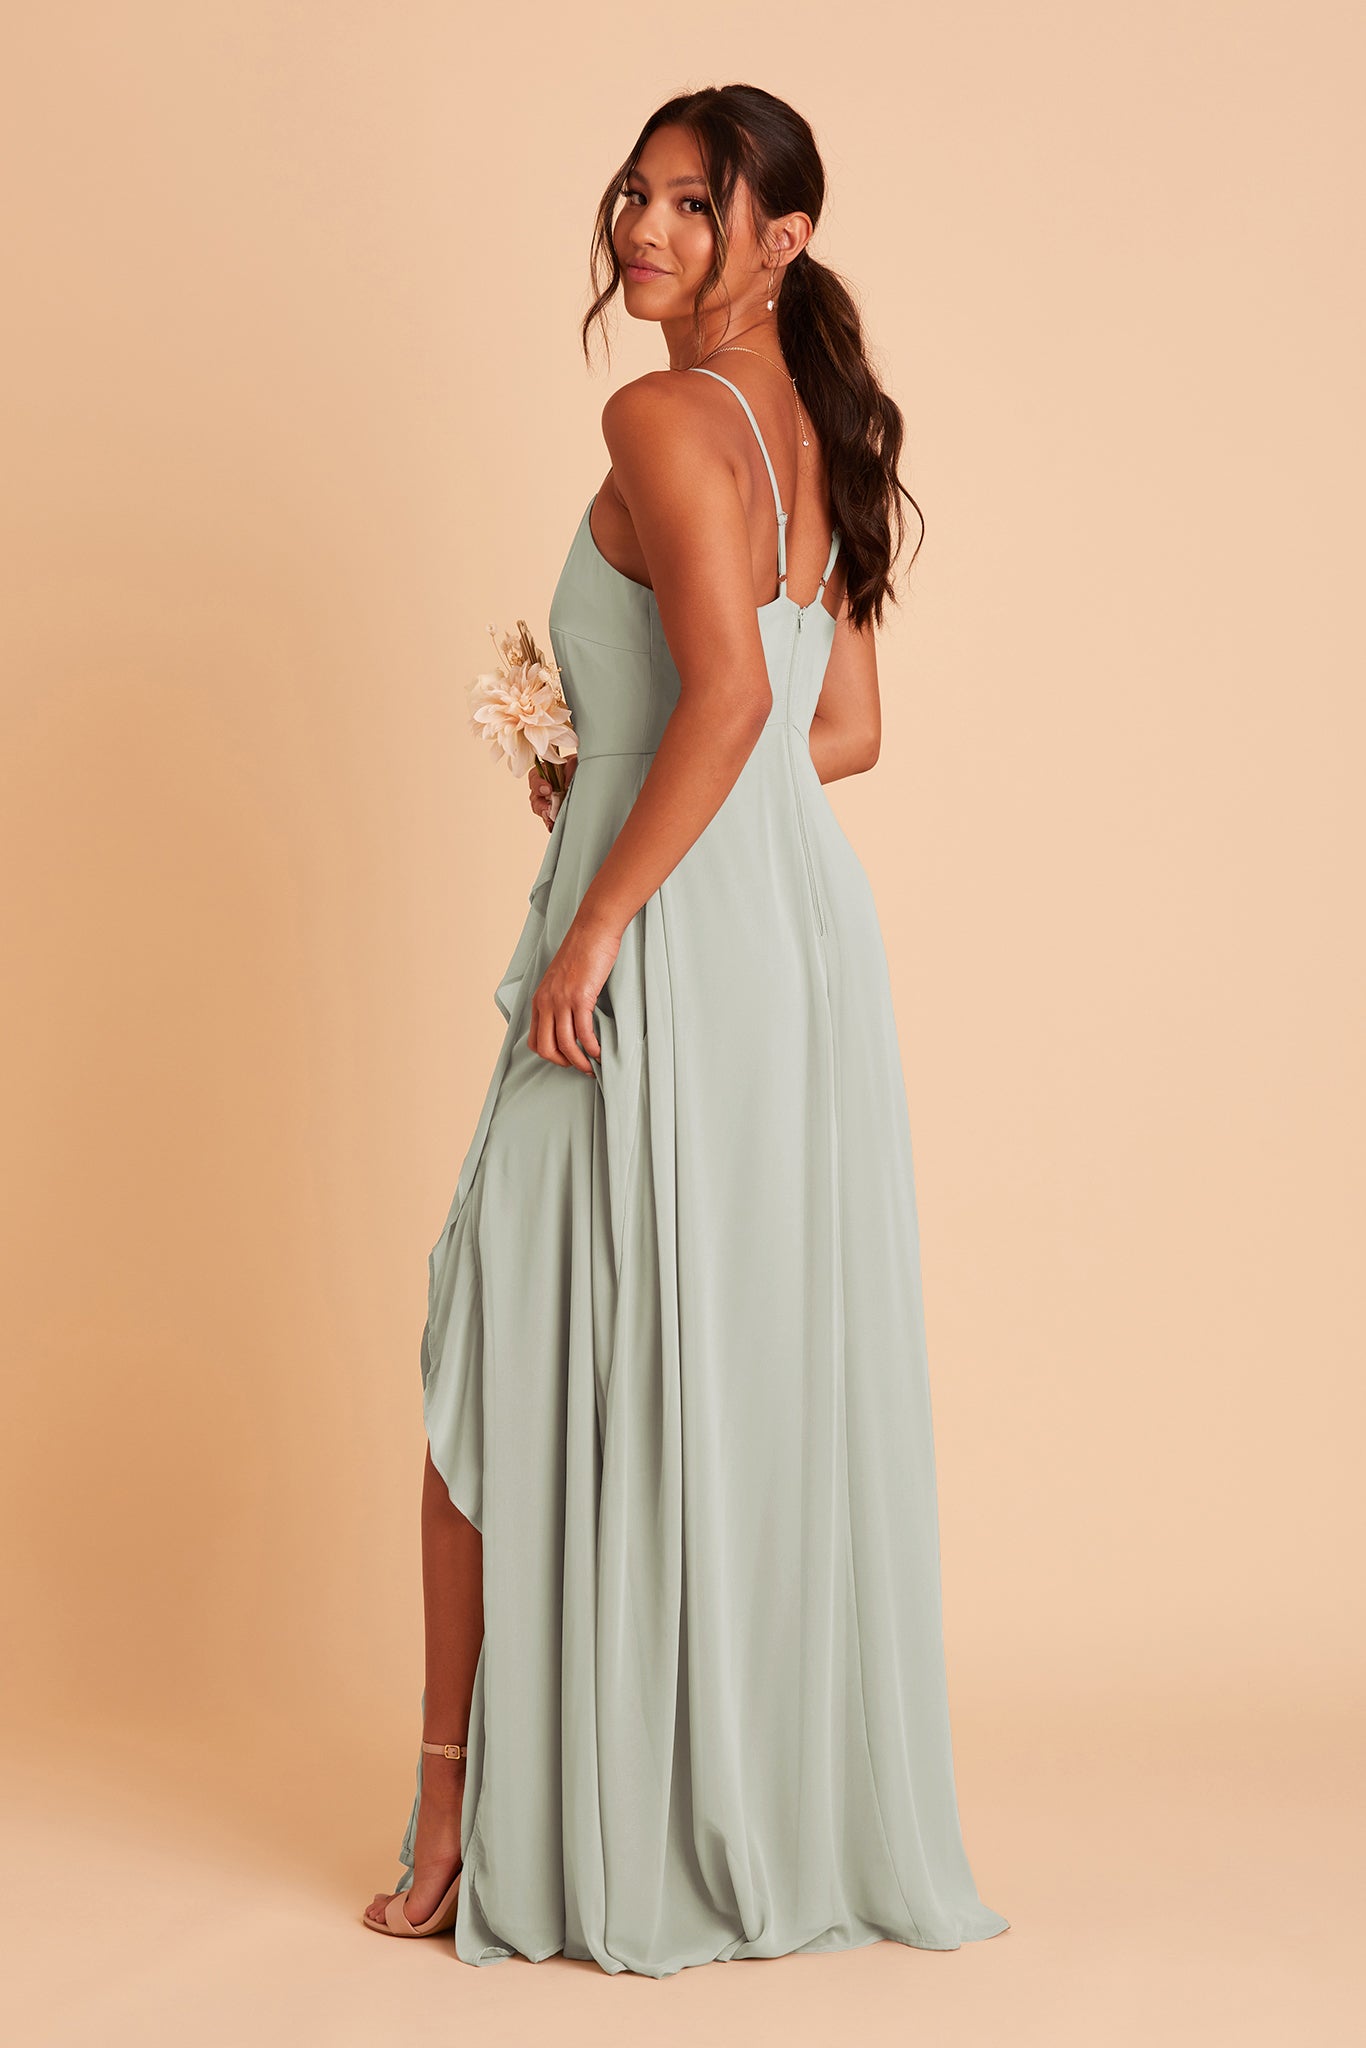 Side view of the Theresa Dress in sage chiffon with the optional slit shows a model looking at us and holding the side slit to reveal the ruffles and high heel shoes in nude blush. The adjustable shoulder straps are angled toward the center seam.